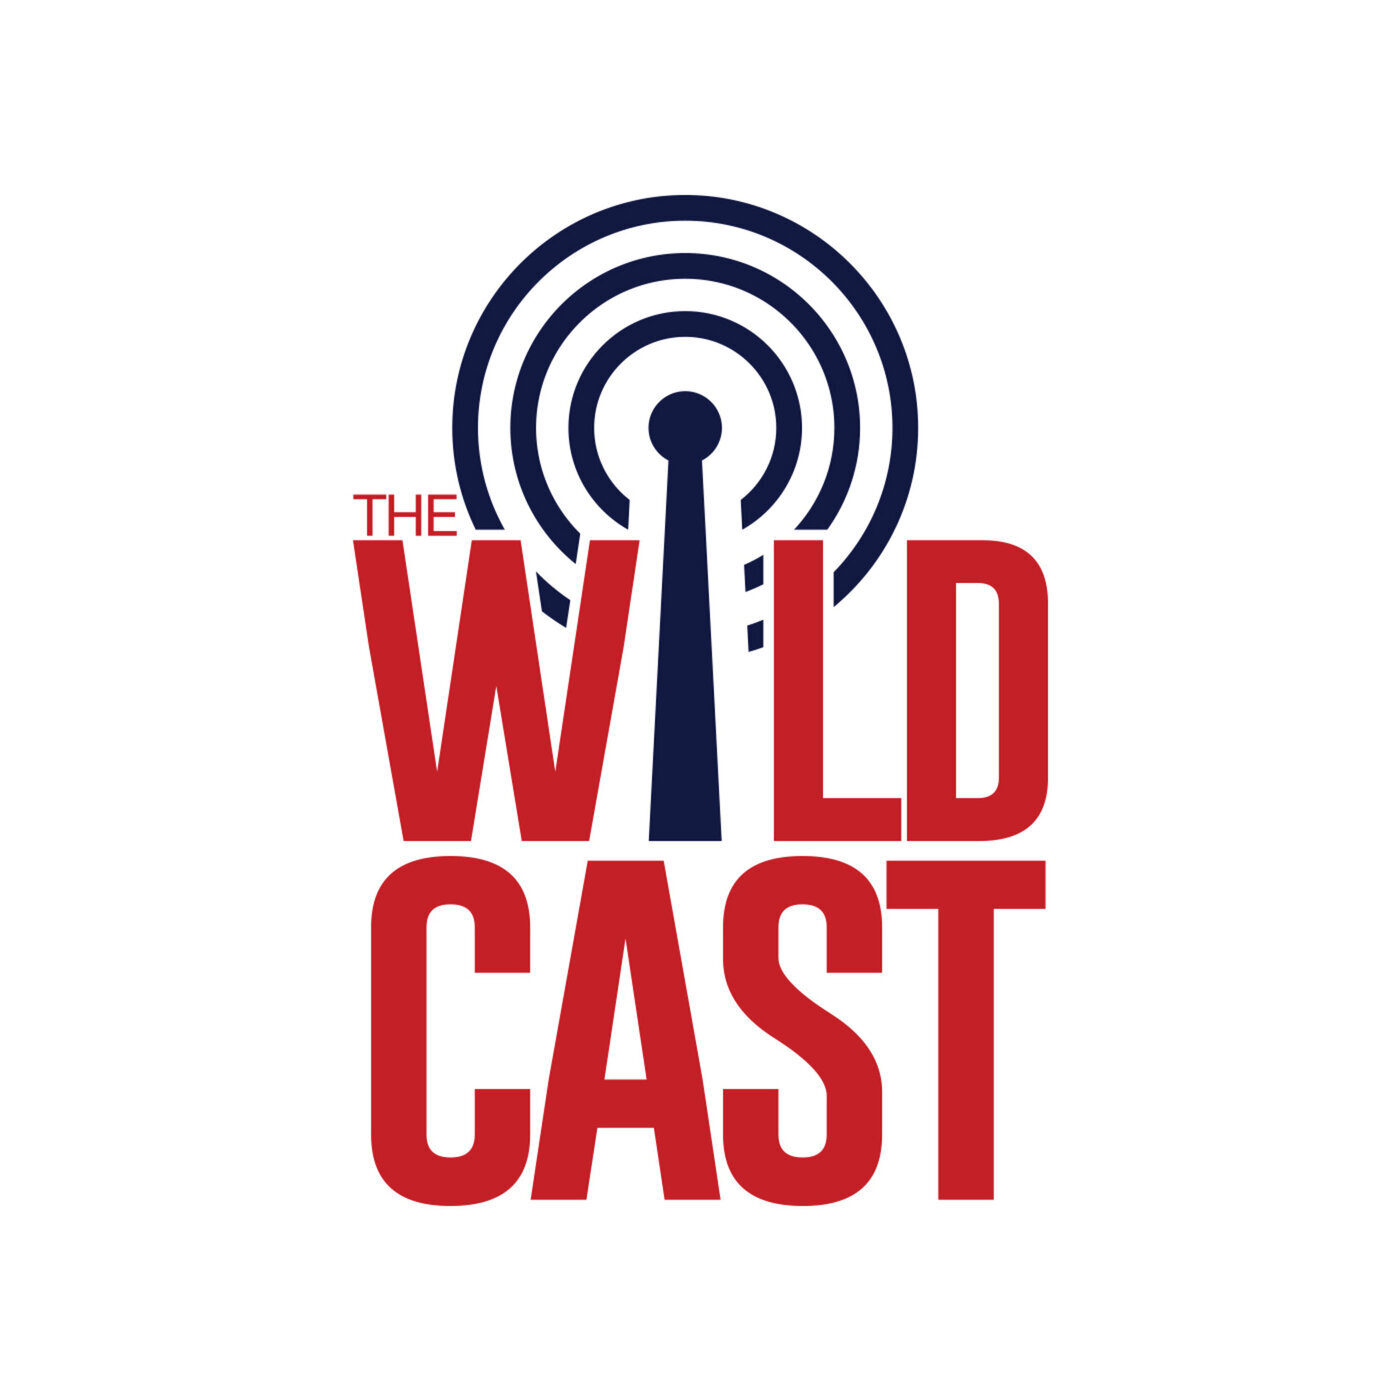 The Wildcast, Episode 454: What's next for Arizona with AD Dave Heeke gone?